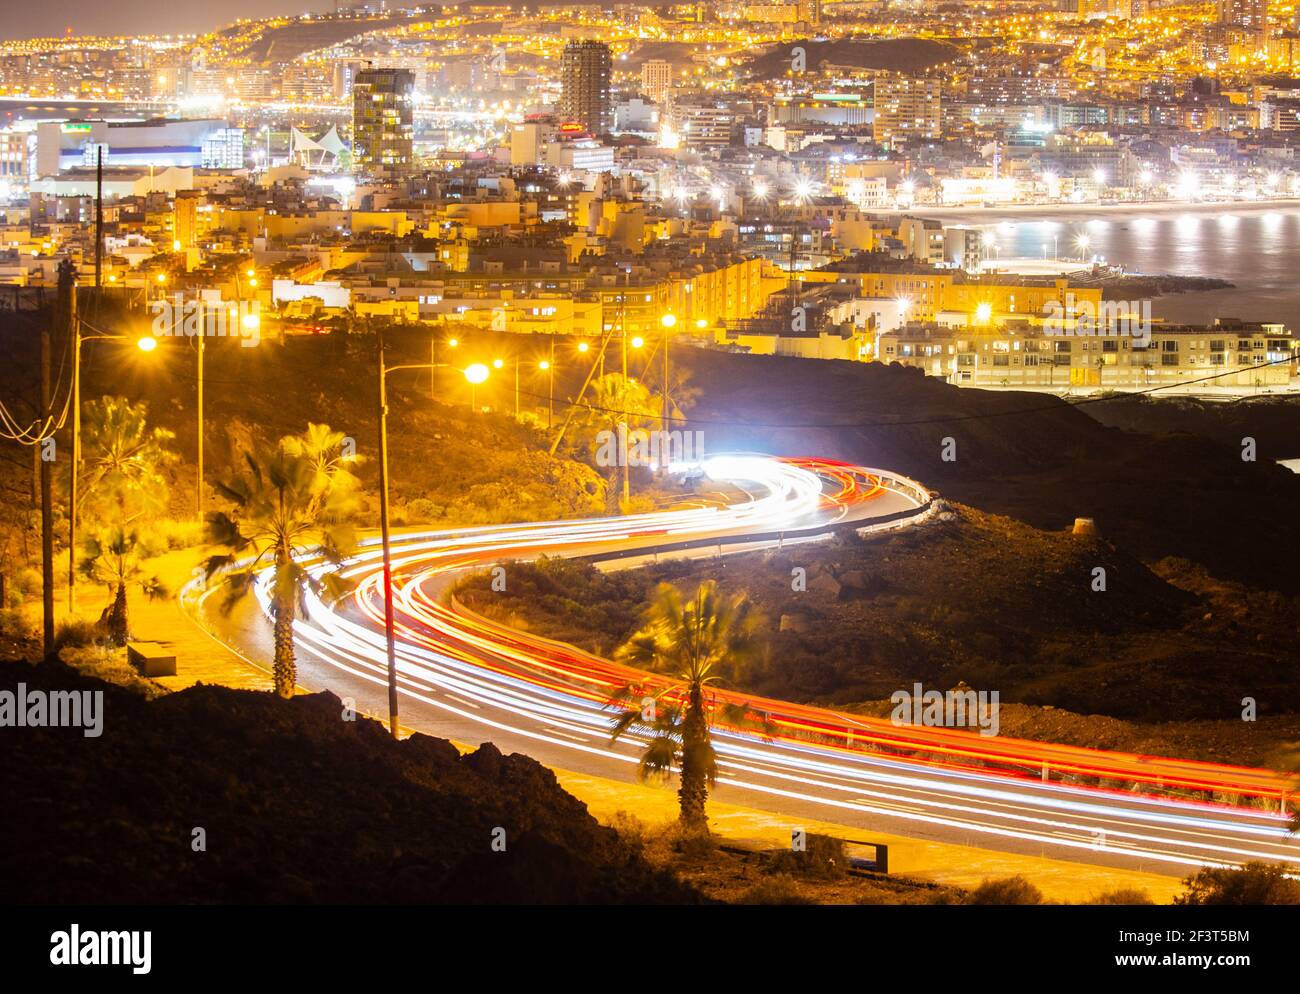 Las Palmas, Gran Canaria, Canary Islands, Spain. 17th March, 2021. View over Las Palmas city at night with  car light trails illuminating snaking road in foreground. Credit: Alan Dawson/Alamy Live News. Stock Photo